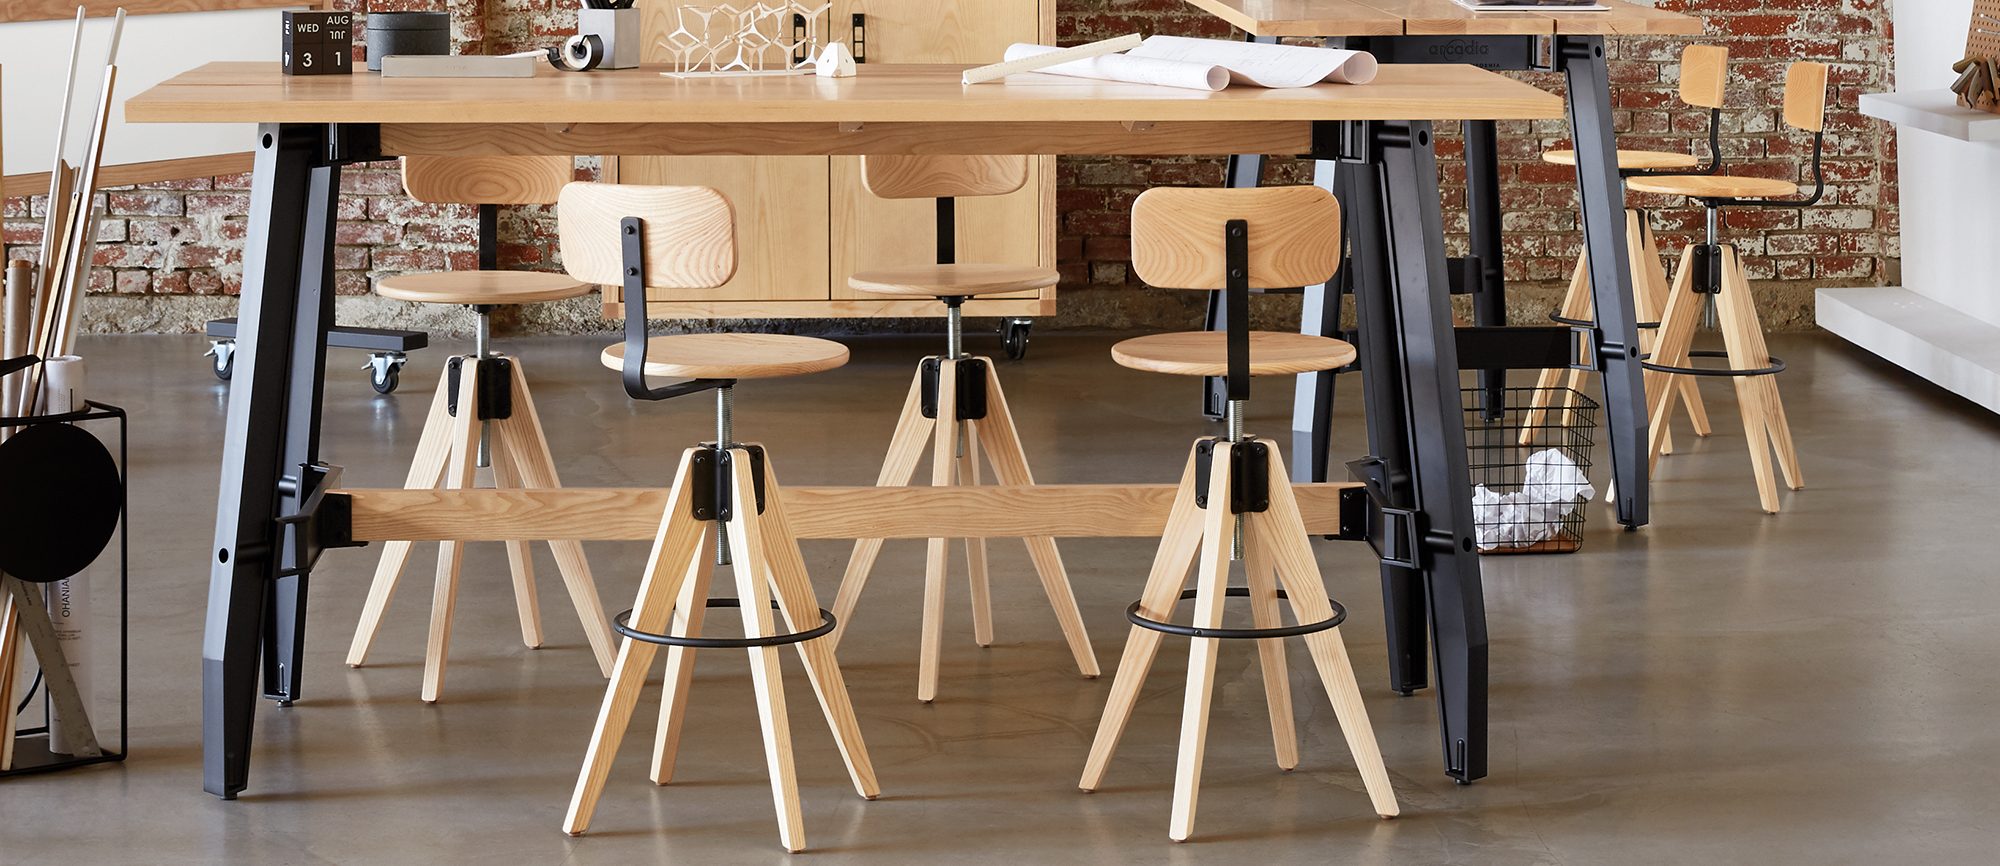 WorkSmith Stools and Meeting Tables